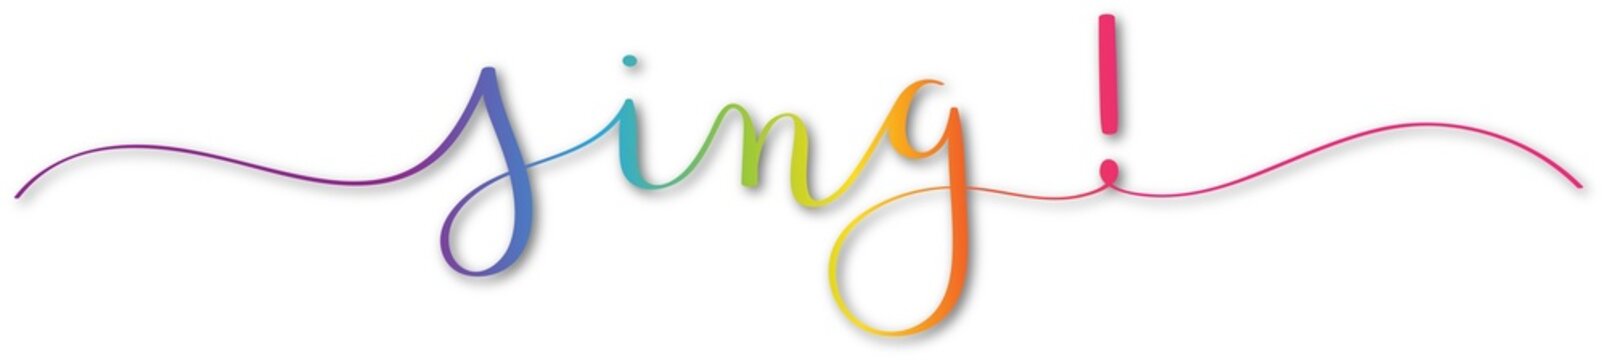 SING! brush calligraphy banner with rainbow gradient on transparent background